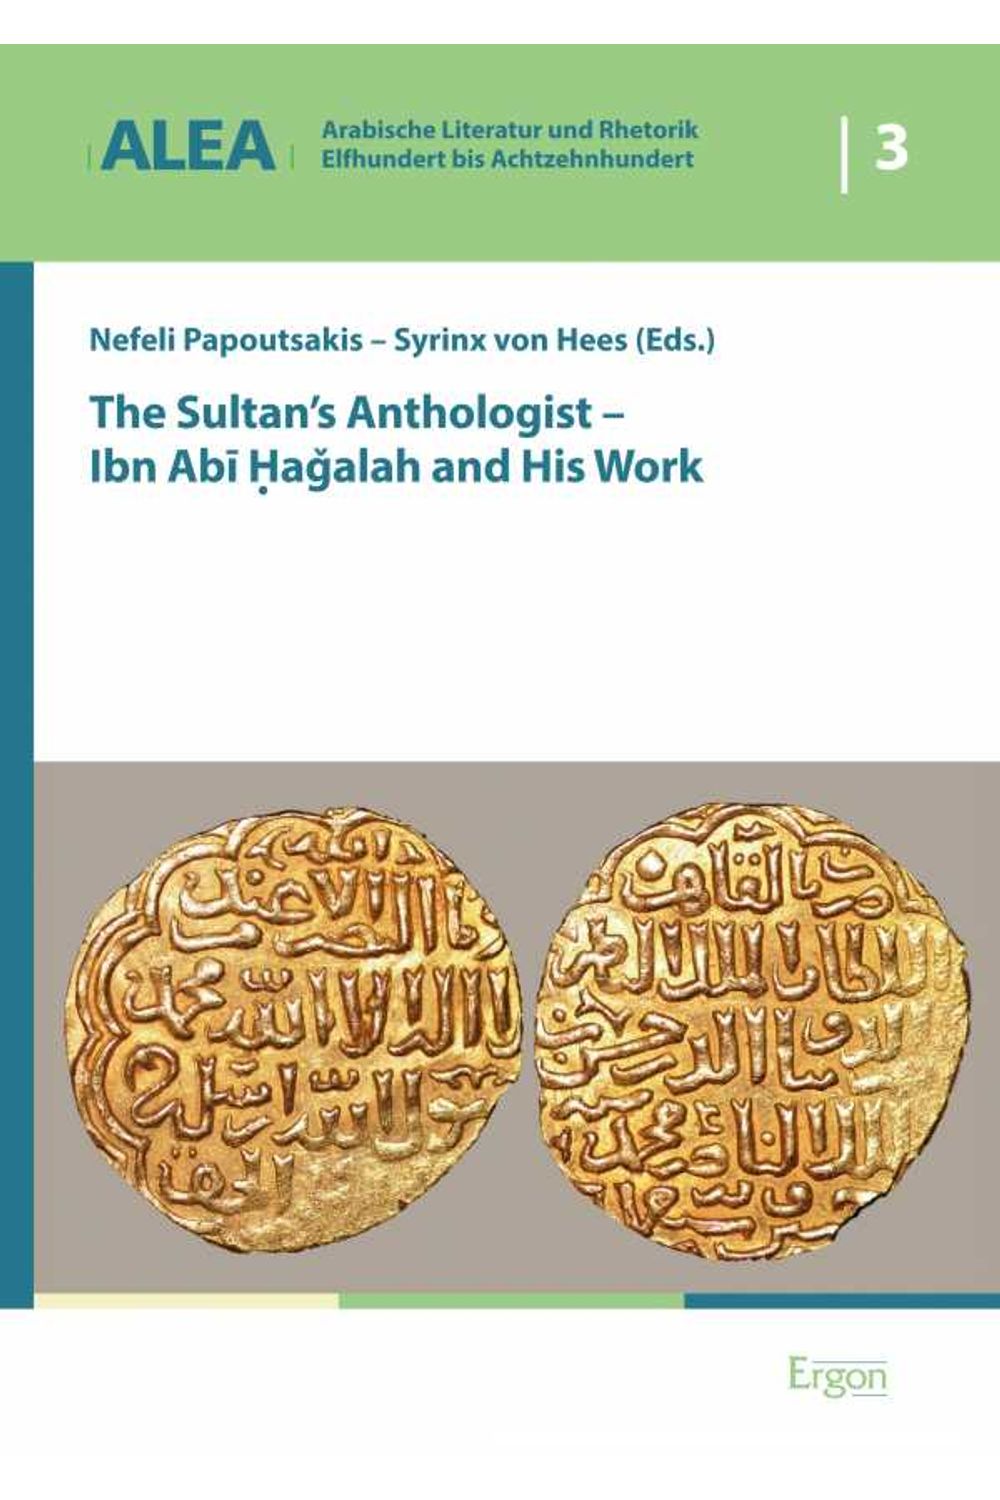 bw-the-sultans-anthologist-ibn-abi-hagalah-and-his-work-ergon-verlag-9783956503641